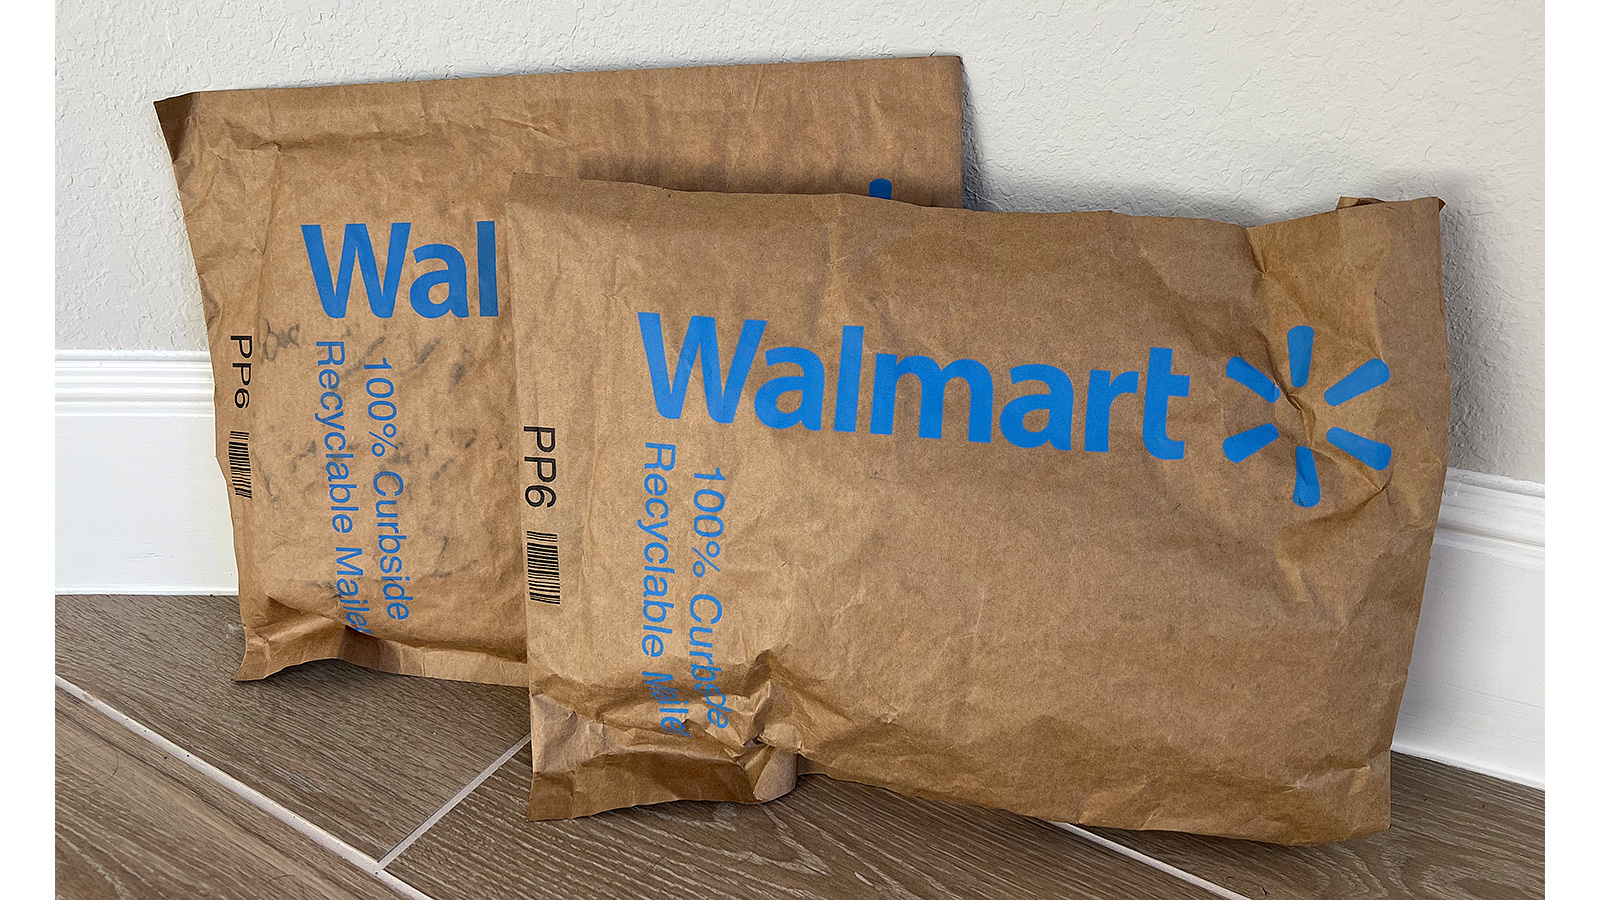 Walmart Does Not Believe In Shipping Boxes Anymore Unless Necessary?